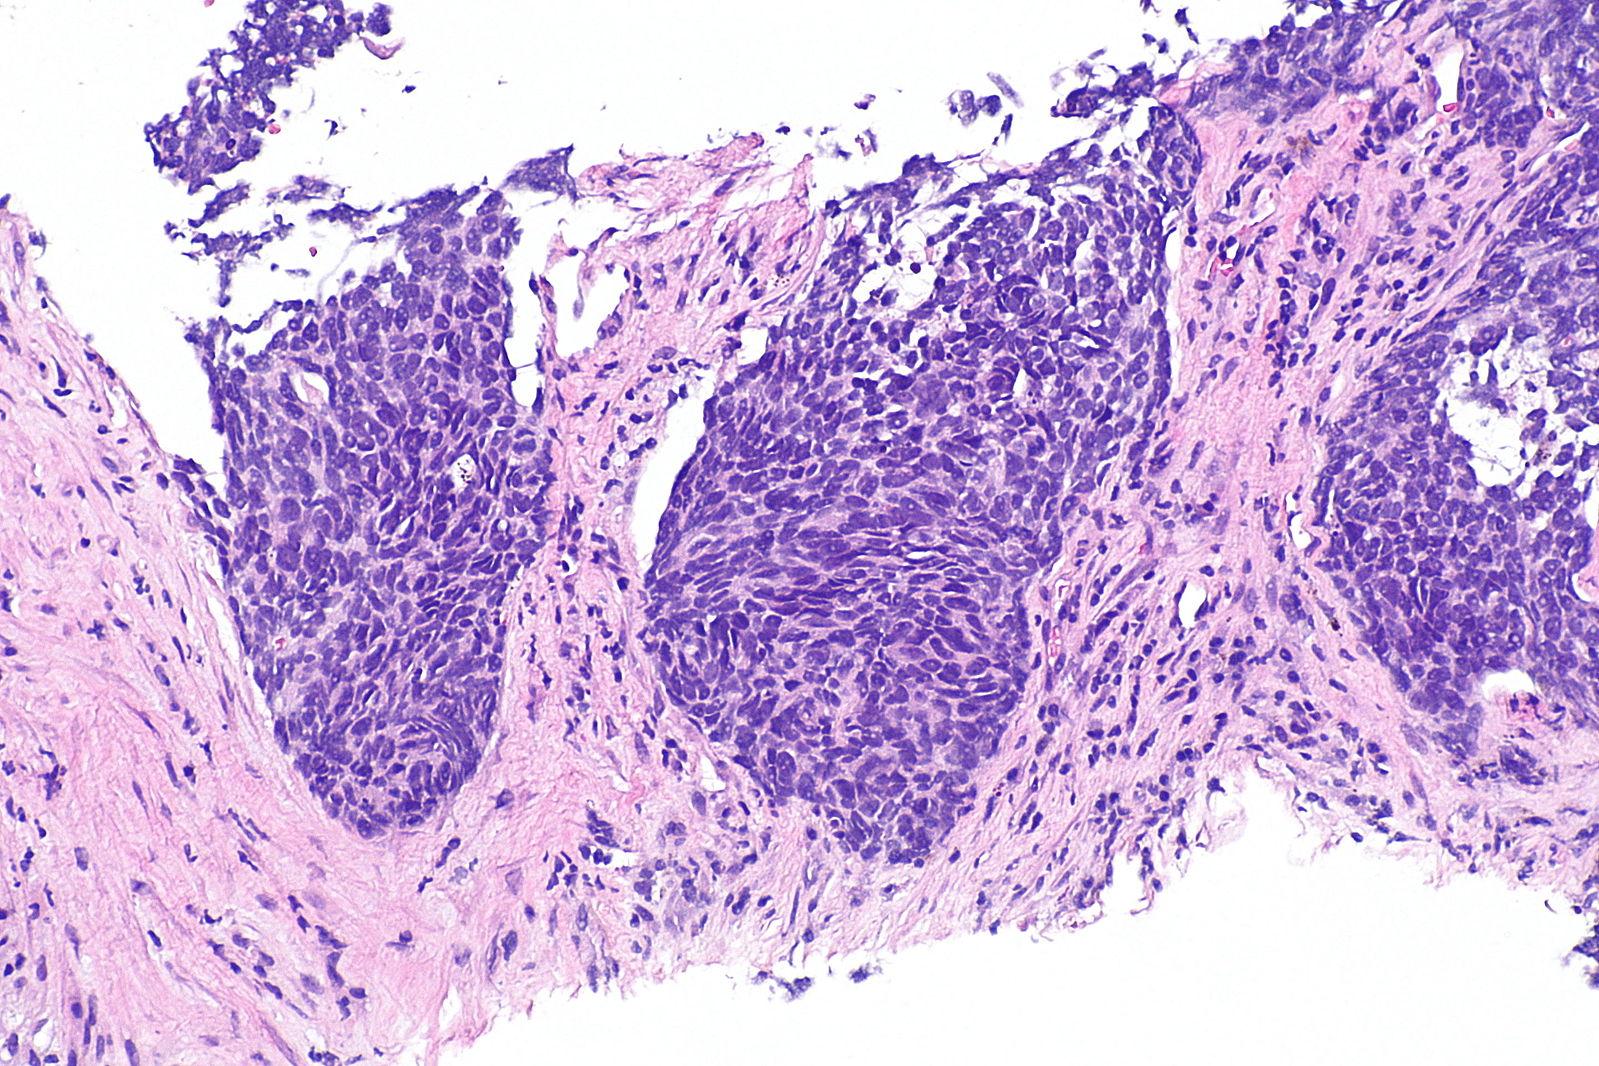 Micropathology non-small cell lung cancer